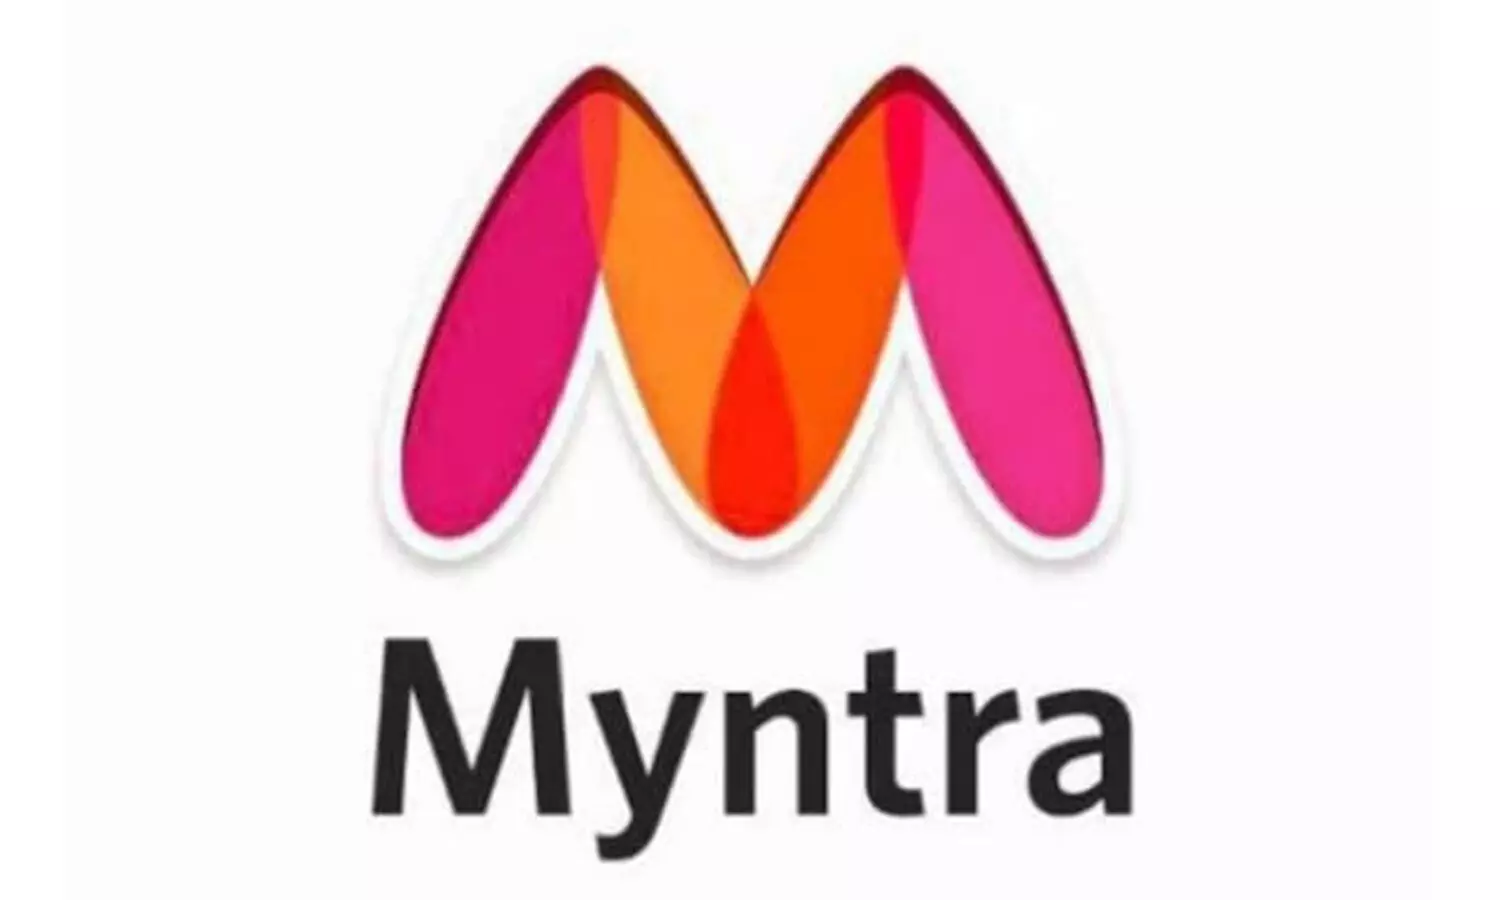 Hyderabad consumer forum orders Myntra to pay Rs. 9,099 for defective product, unfair practices